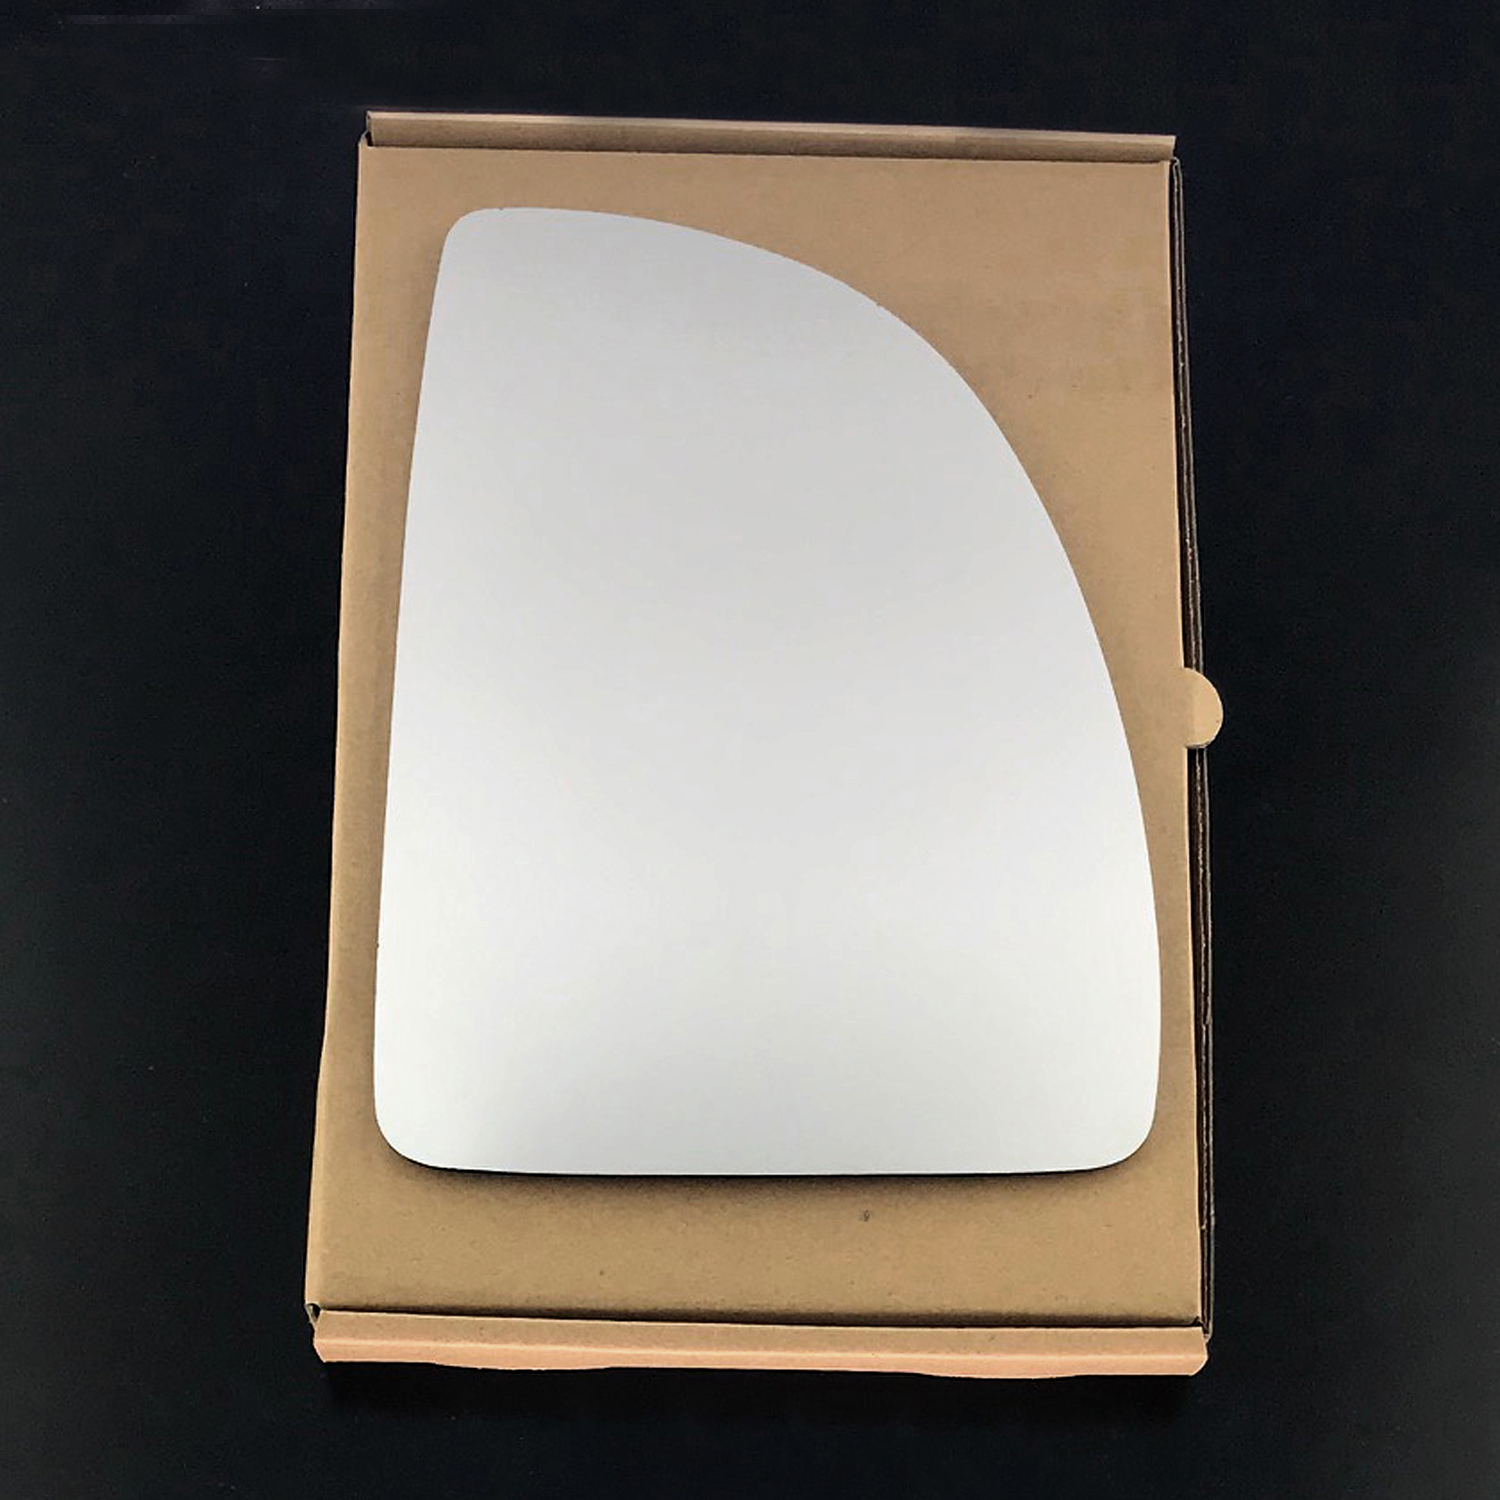 FIAT Ducato Wing Mirror Glass RIGHT HAND ( UK Driver Side ) 2001 to 2006 – Convex Wing Mirror